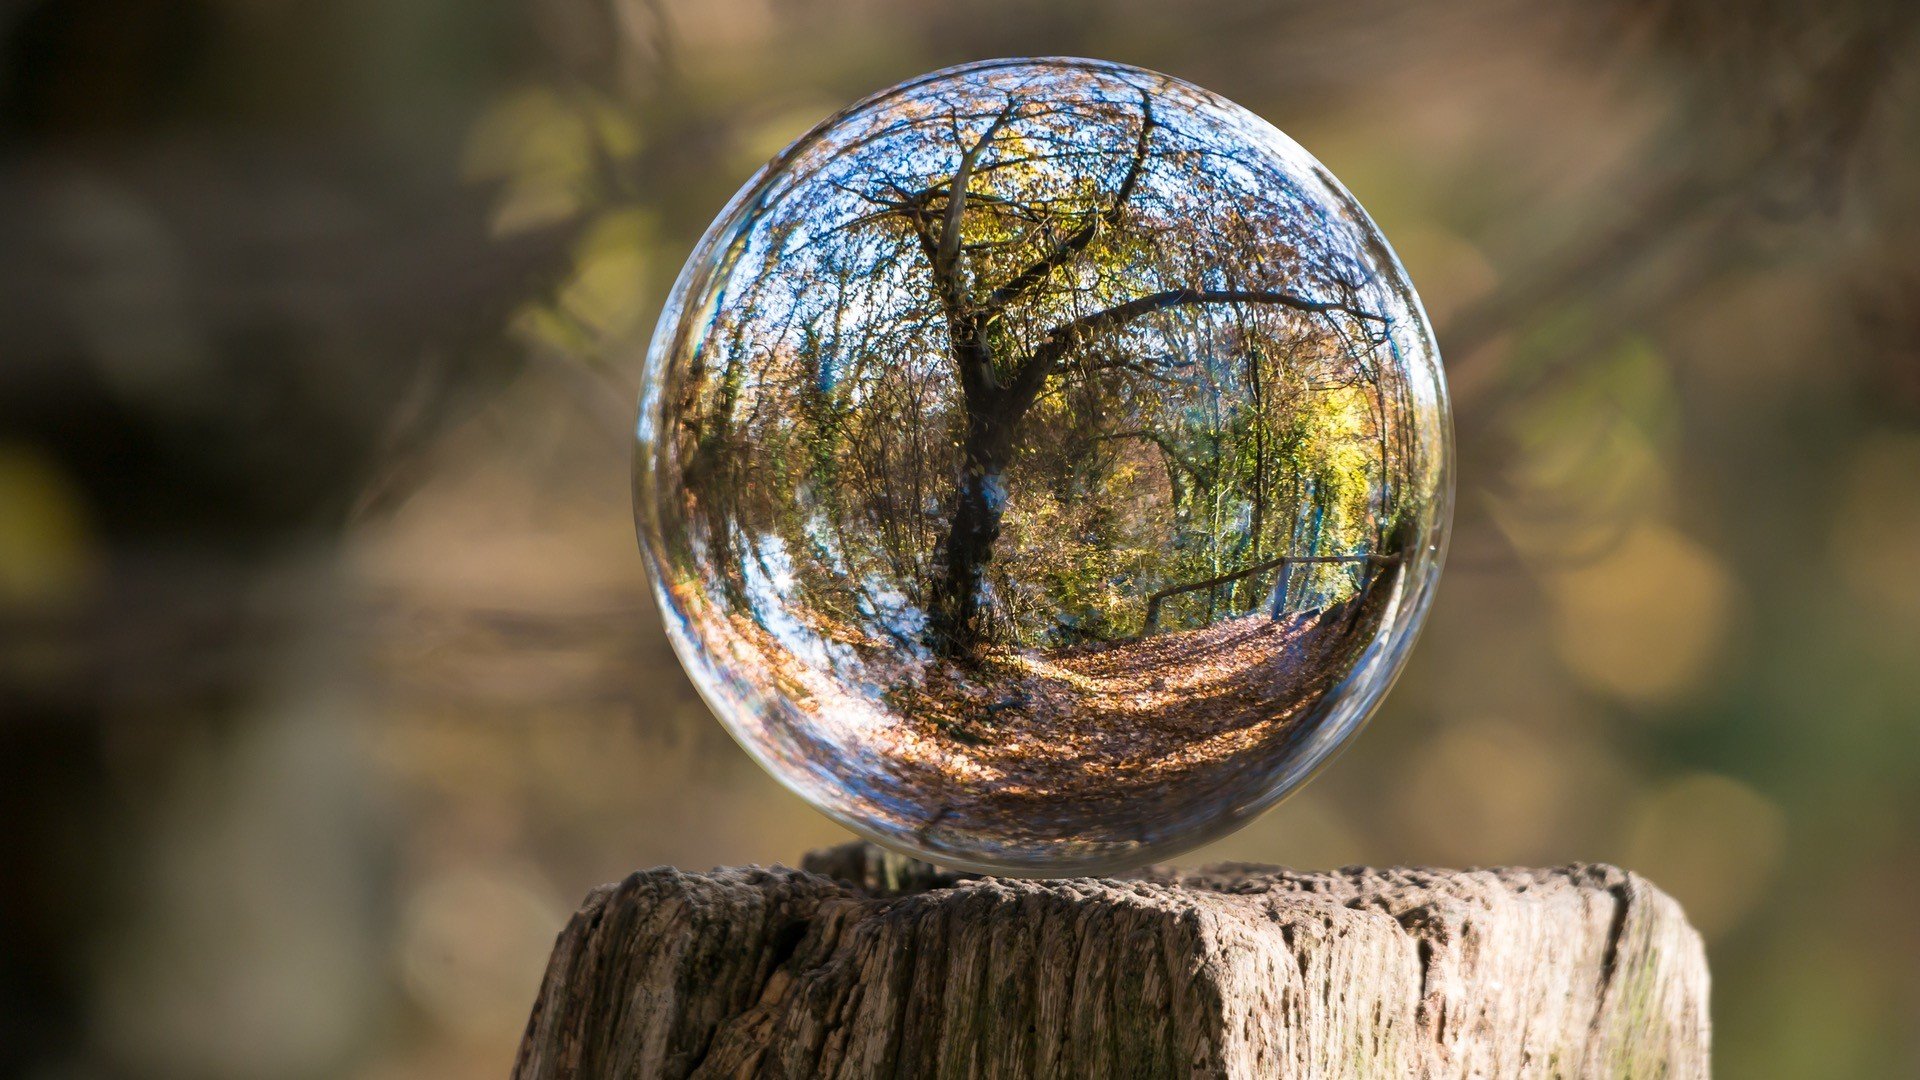 nature, Landscape, Trunks, Wood, Sphere, Glass, Reflection, Trees, Fall